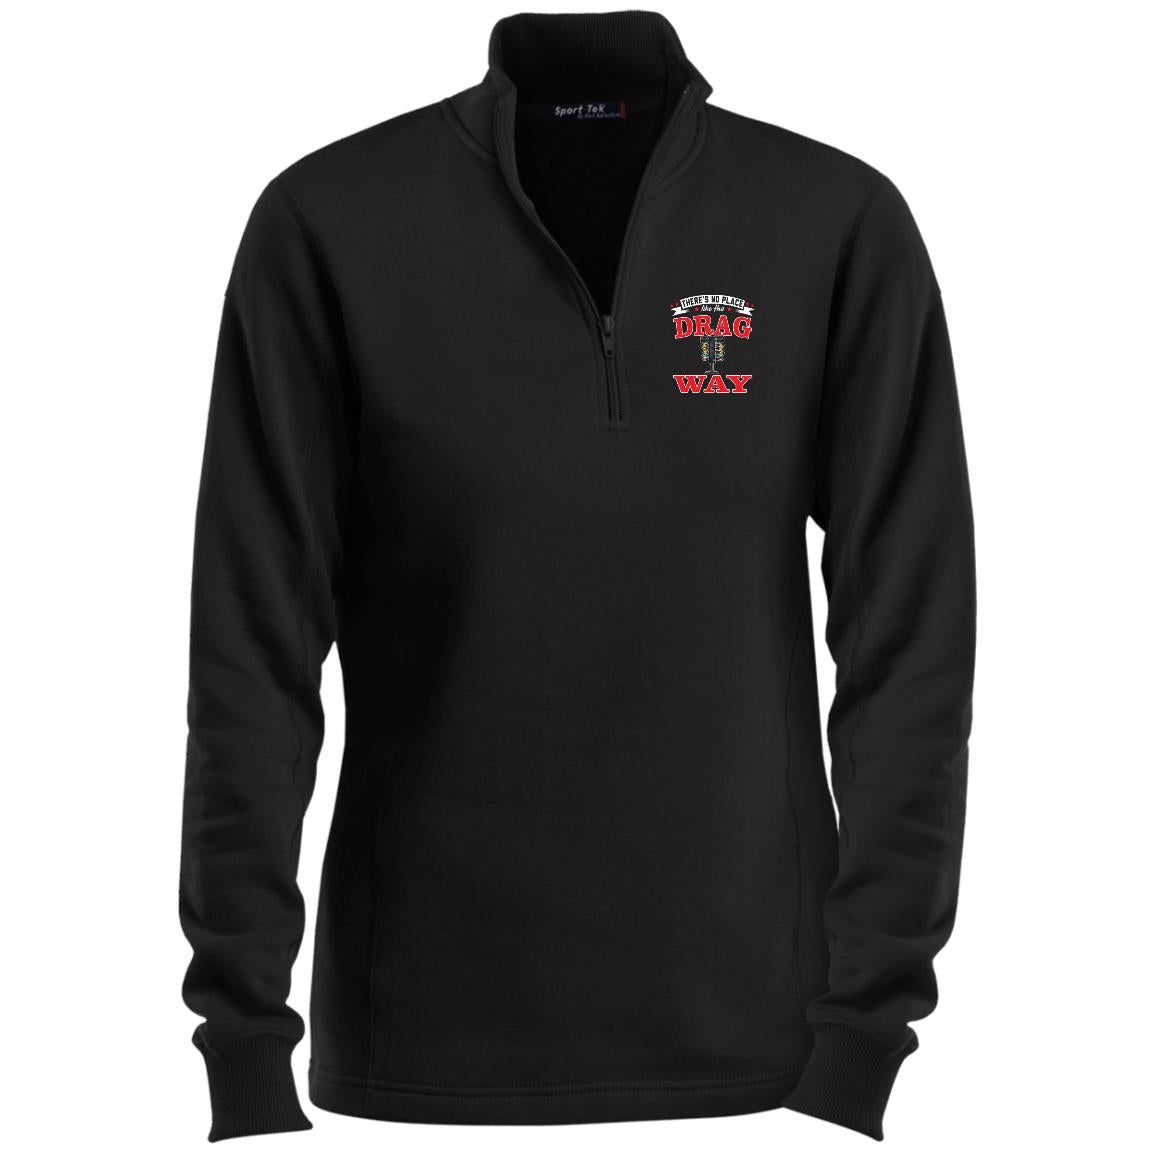 There's No Place Like The Dragway Ladies 1/4 Zip Sweatshirt